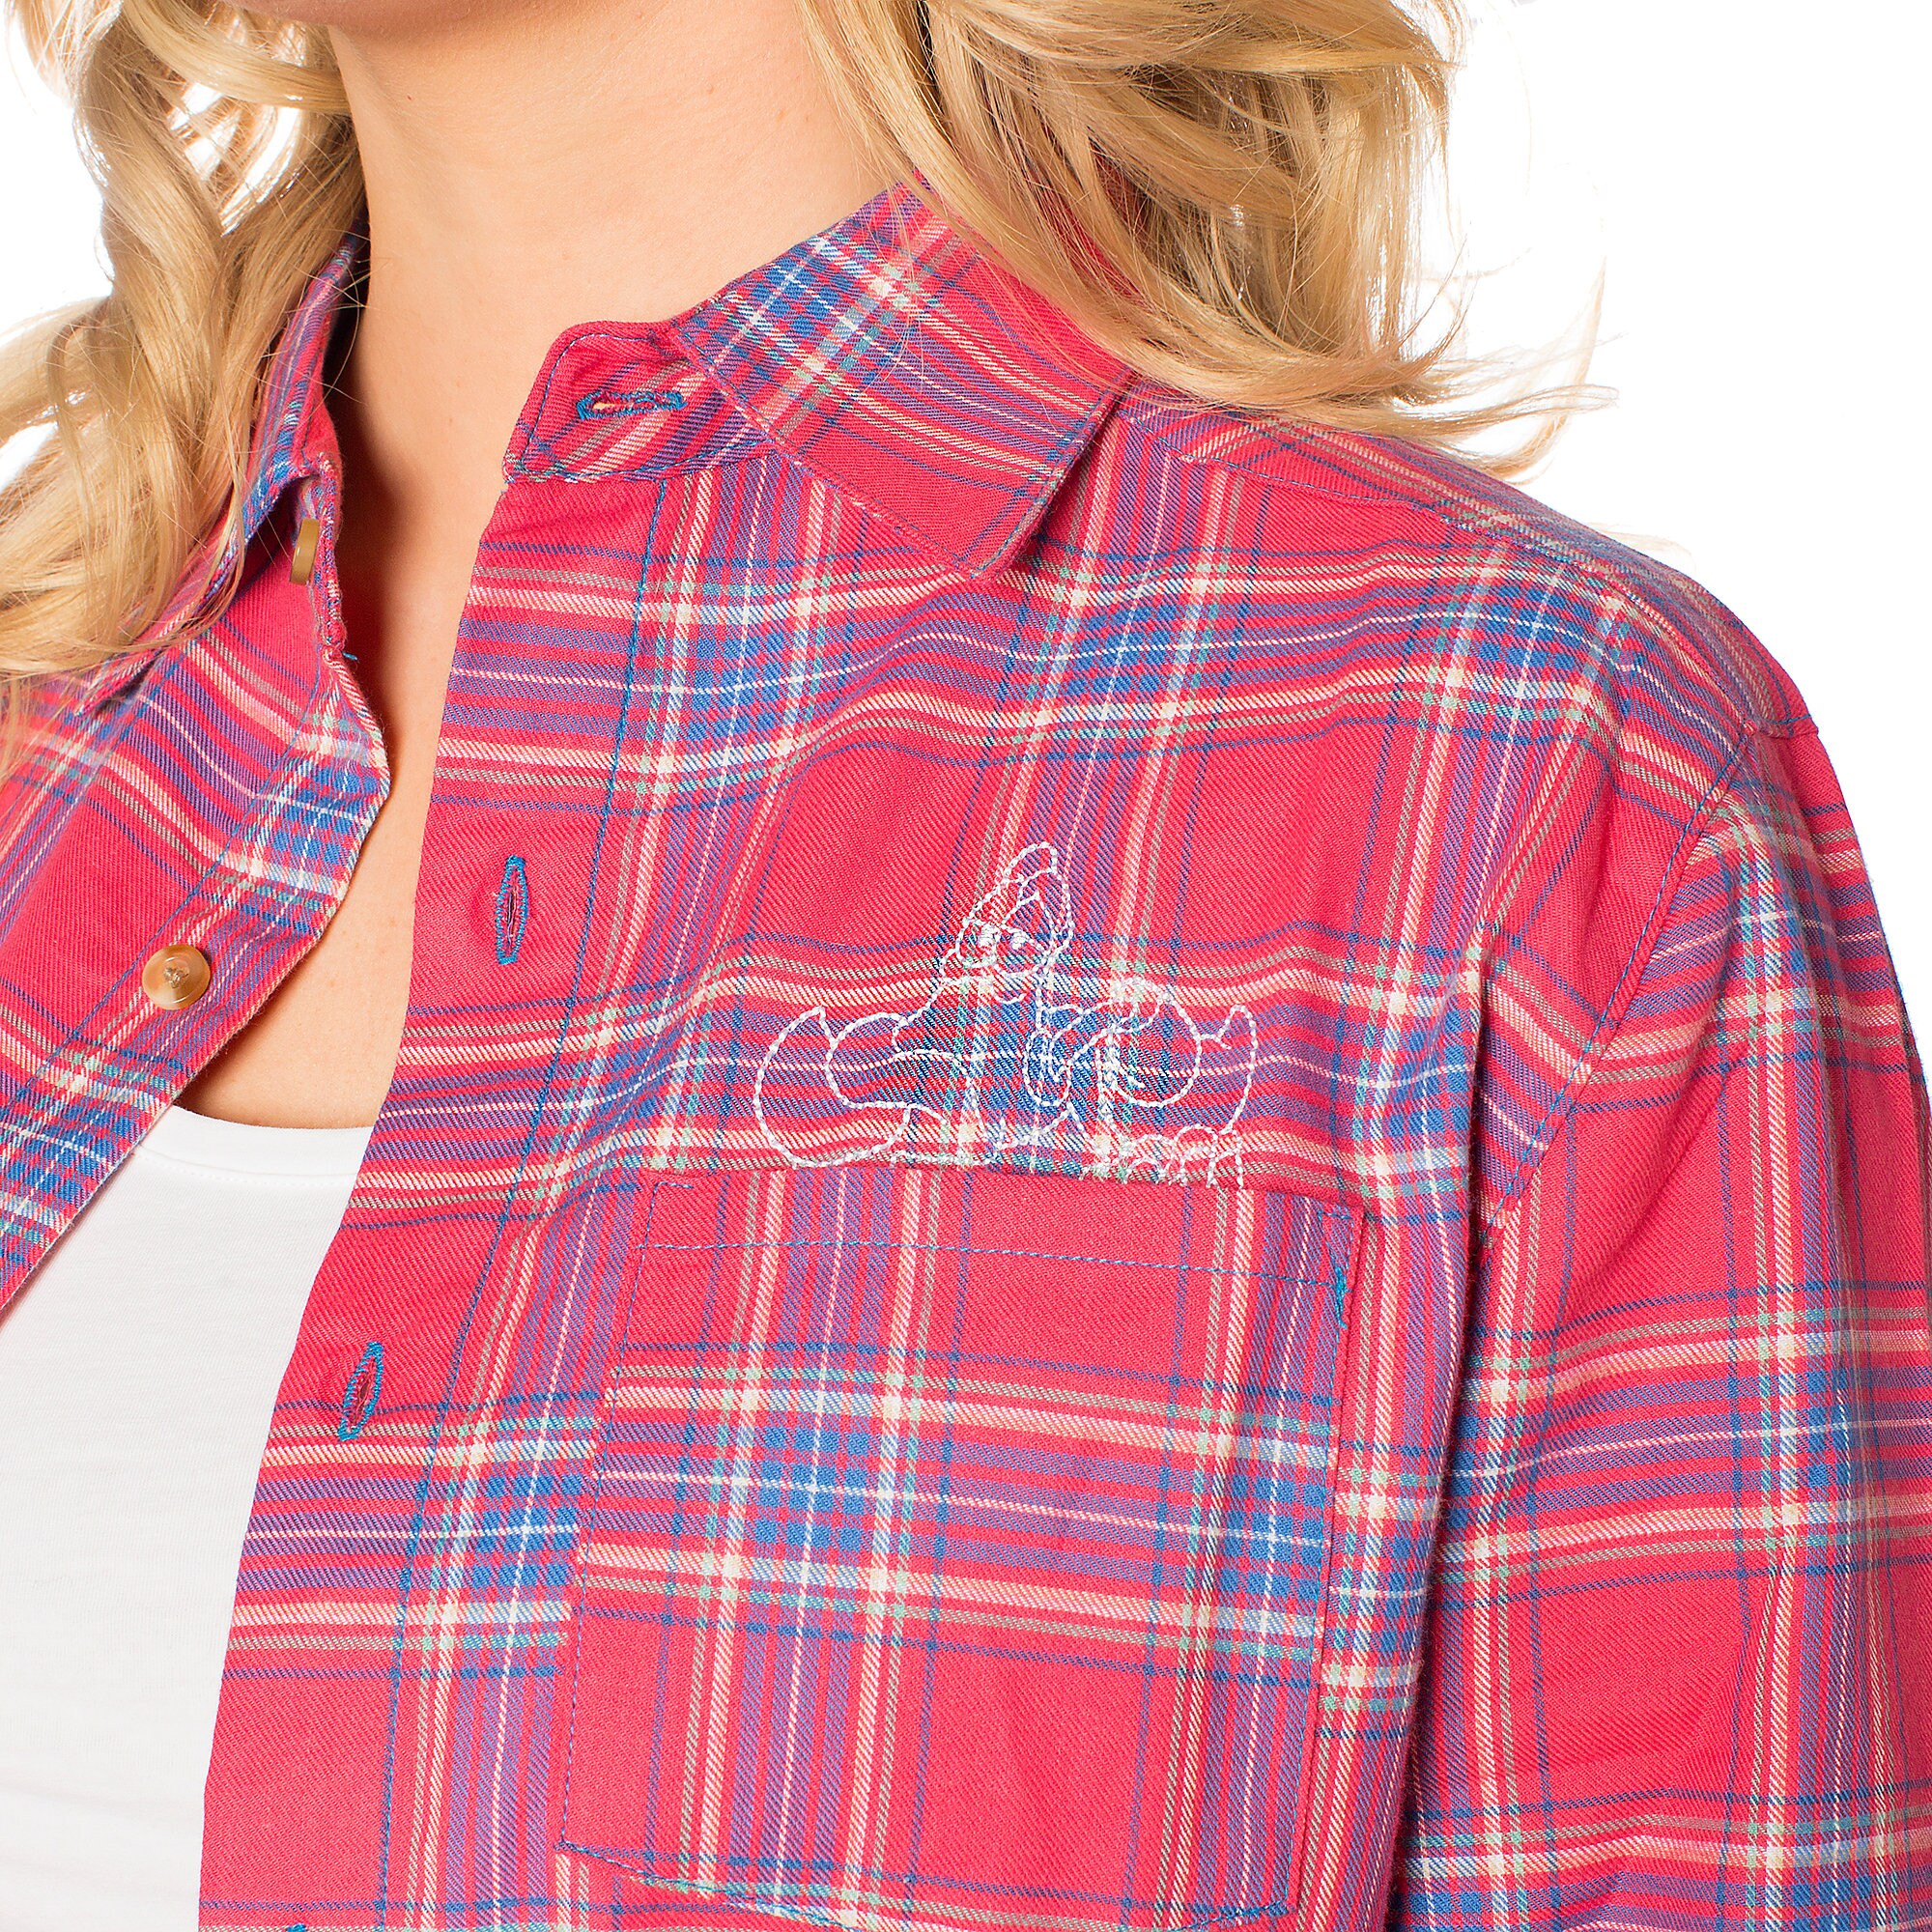 Sebastian Flannel Shirt for Adults by Cakeworthy - The Little Mermaid